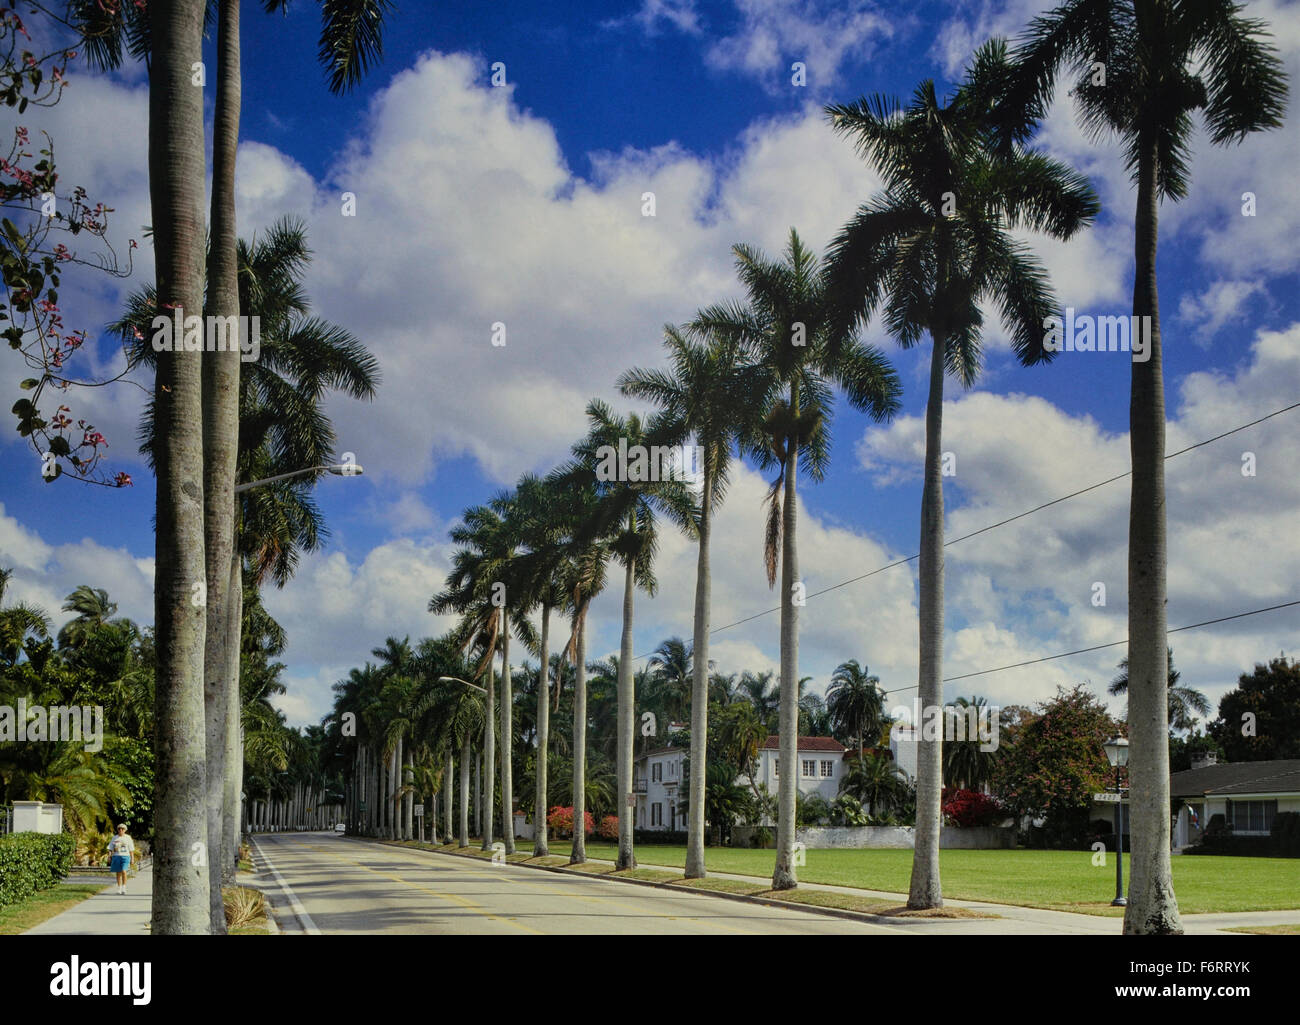 McGregor Boulevard. The Avenue of the palms, Fort Myers. Florida. USA Stock Photo